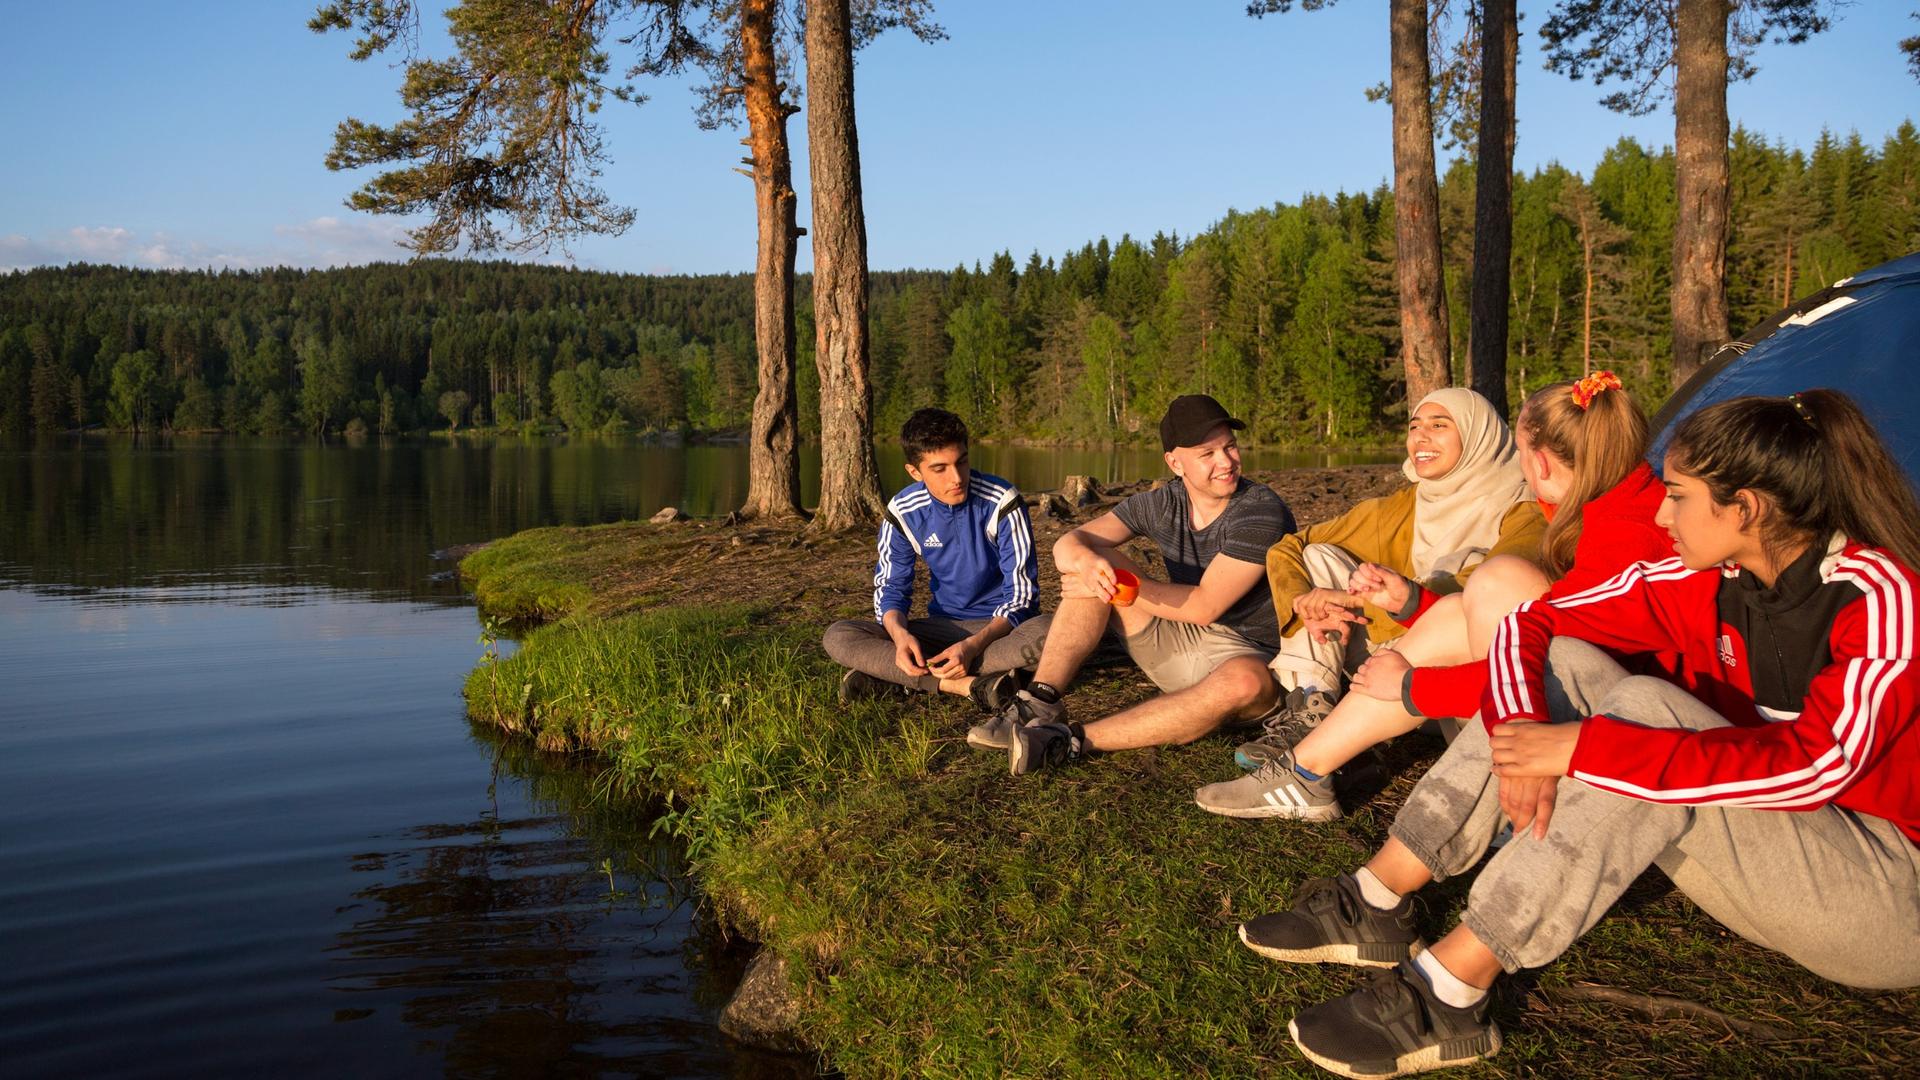 Norwegian youth sit on the ground while spending time outdoors on a lake.